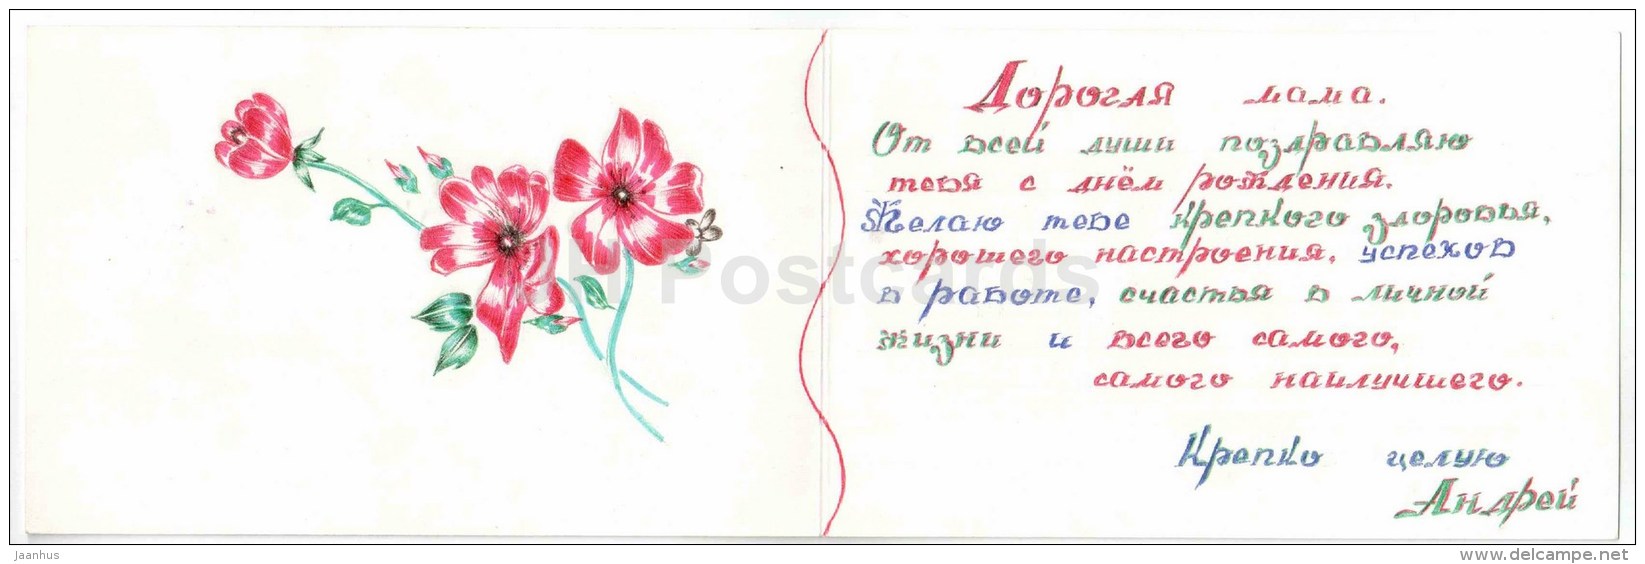 Birthday greeting card by V. Makarov - flowers - illustration - 1983 - Russia USSR - used - JH Postcards